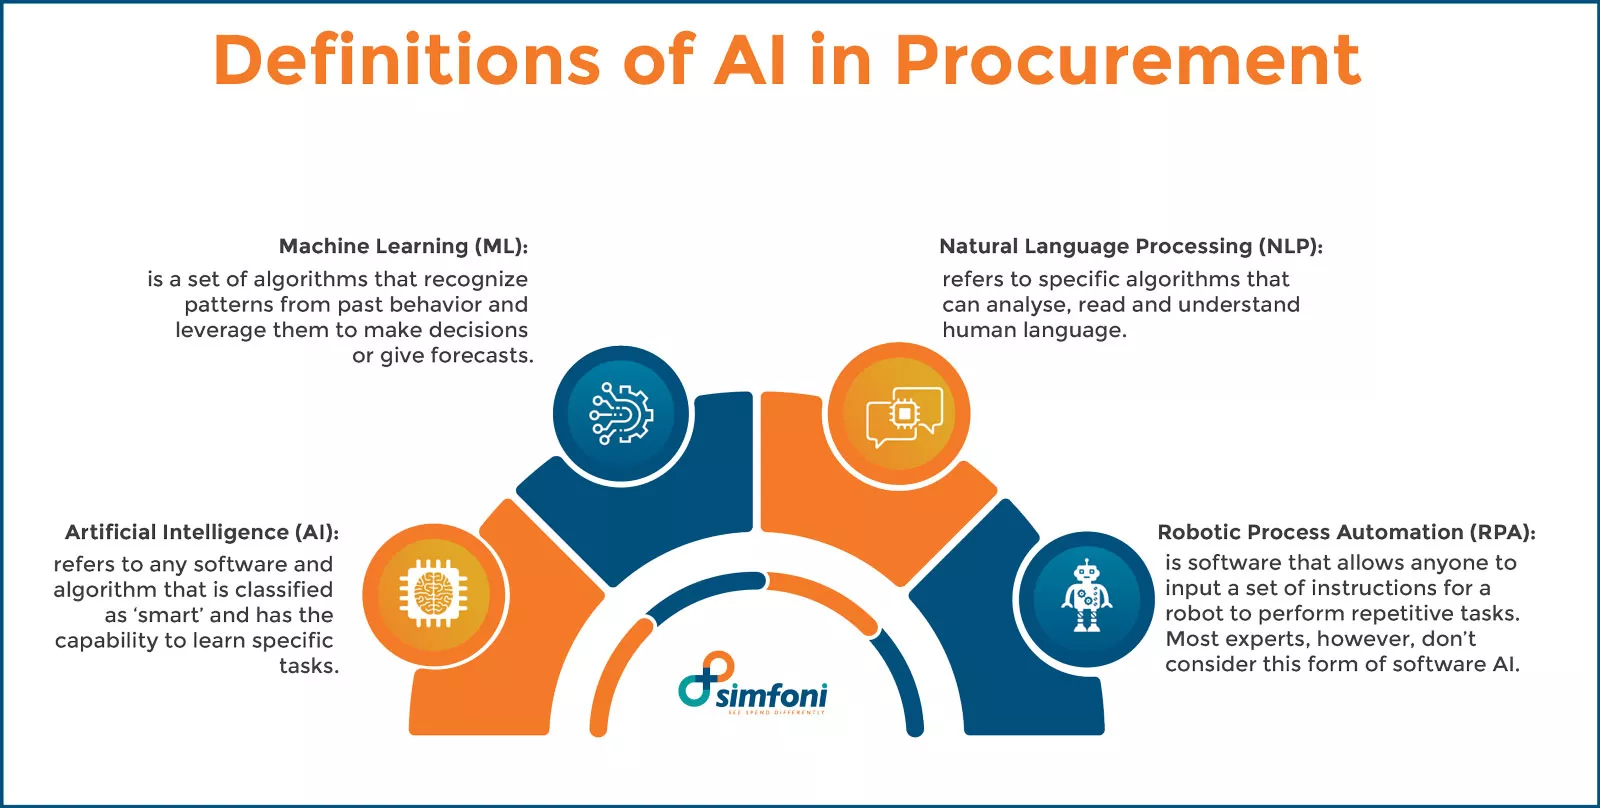 Definitions of AI in Procurement